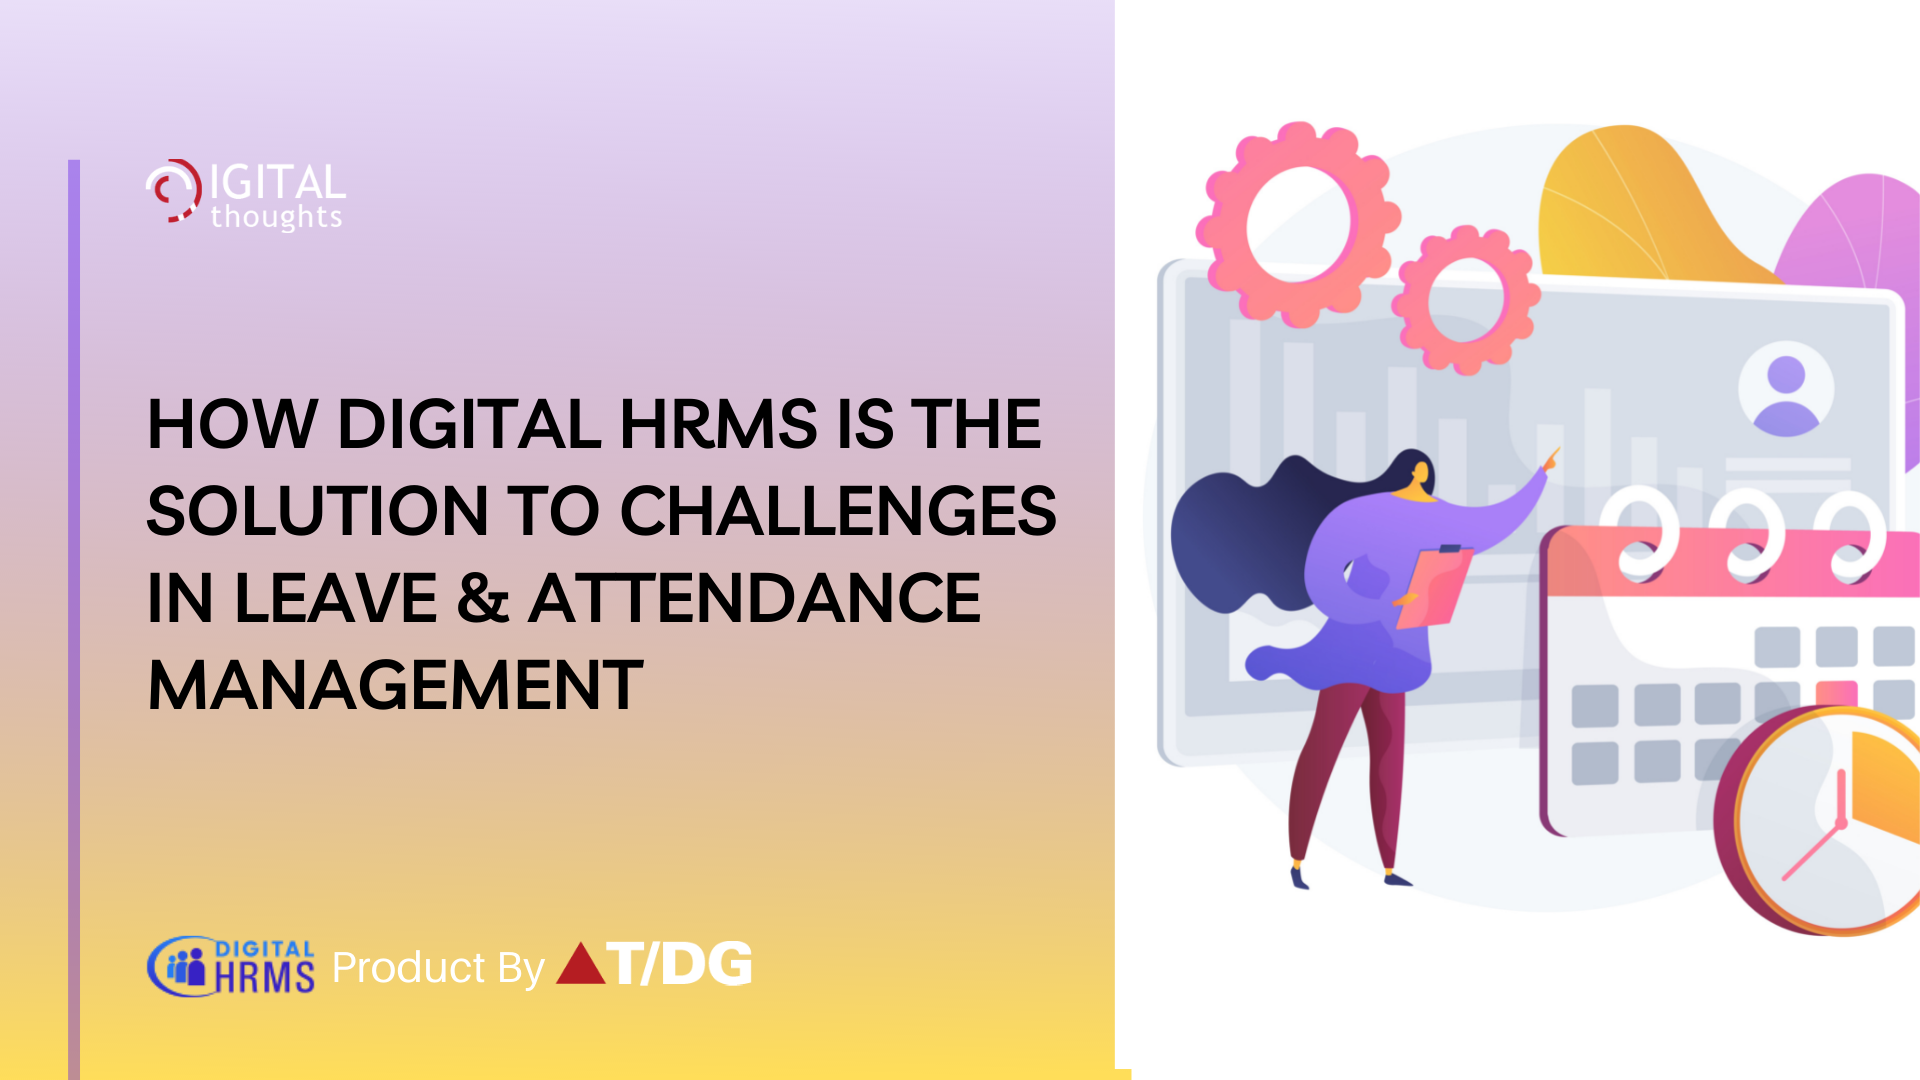 What Makes Digital HRMS the Ideal Solution for Challenges in Leave & Attendance Management